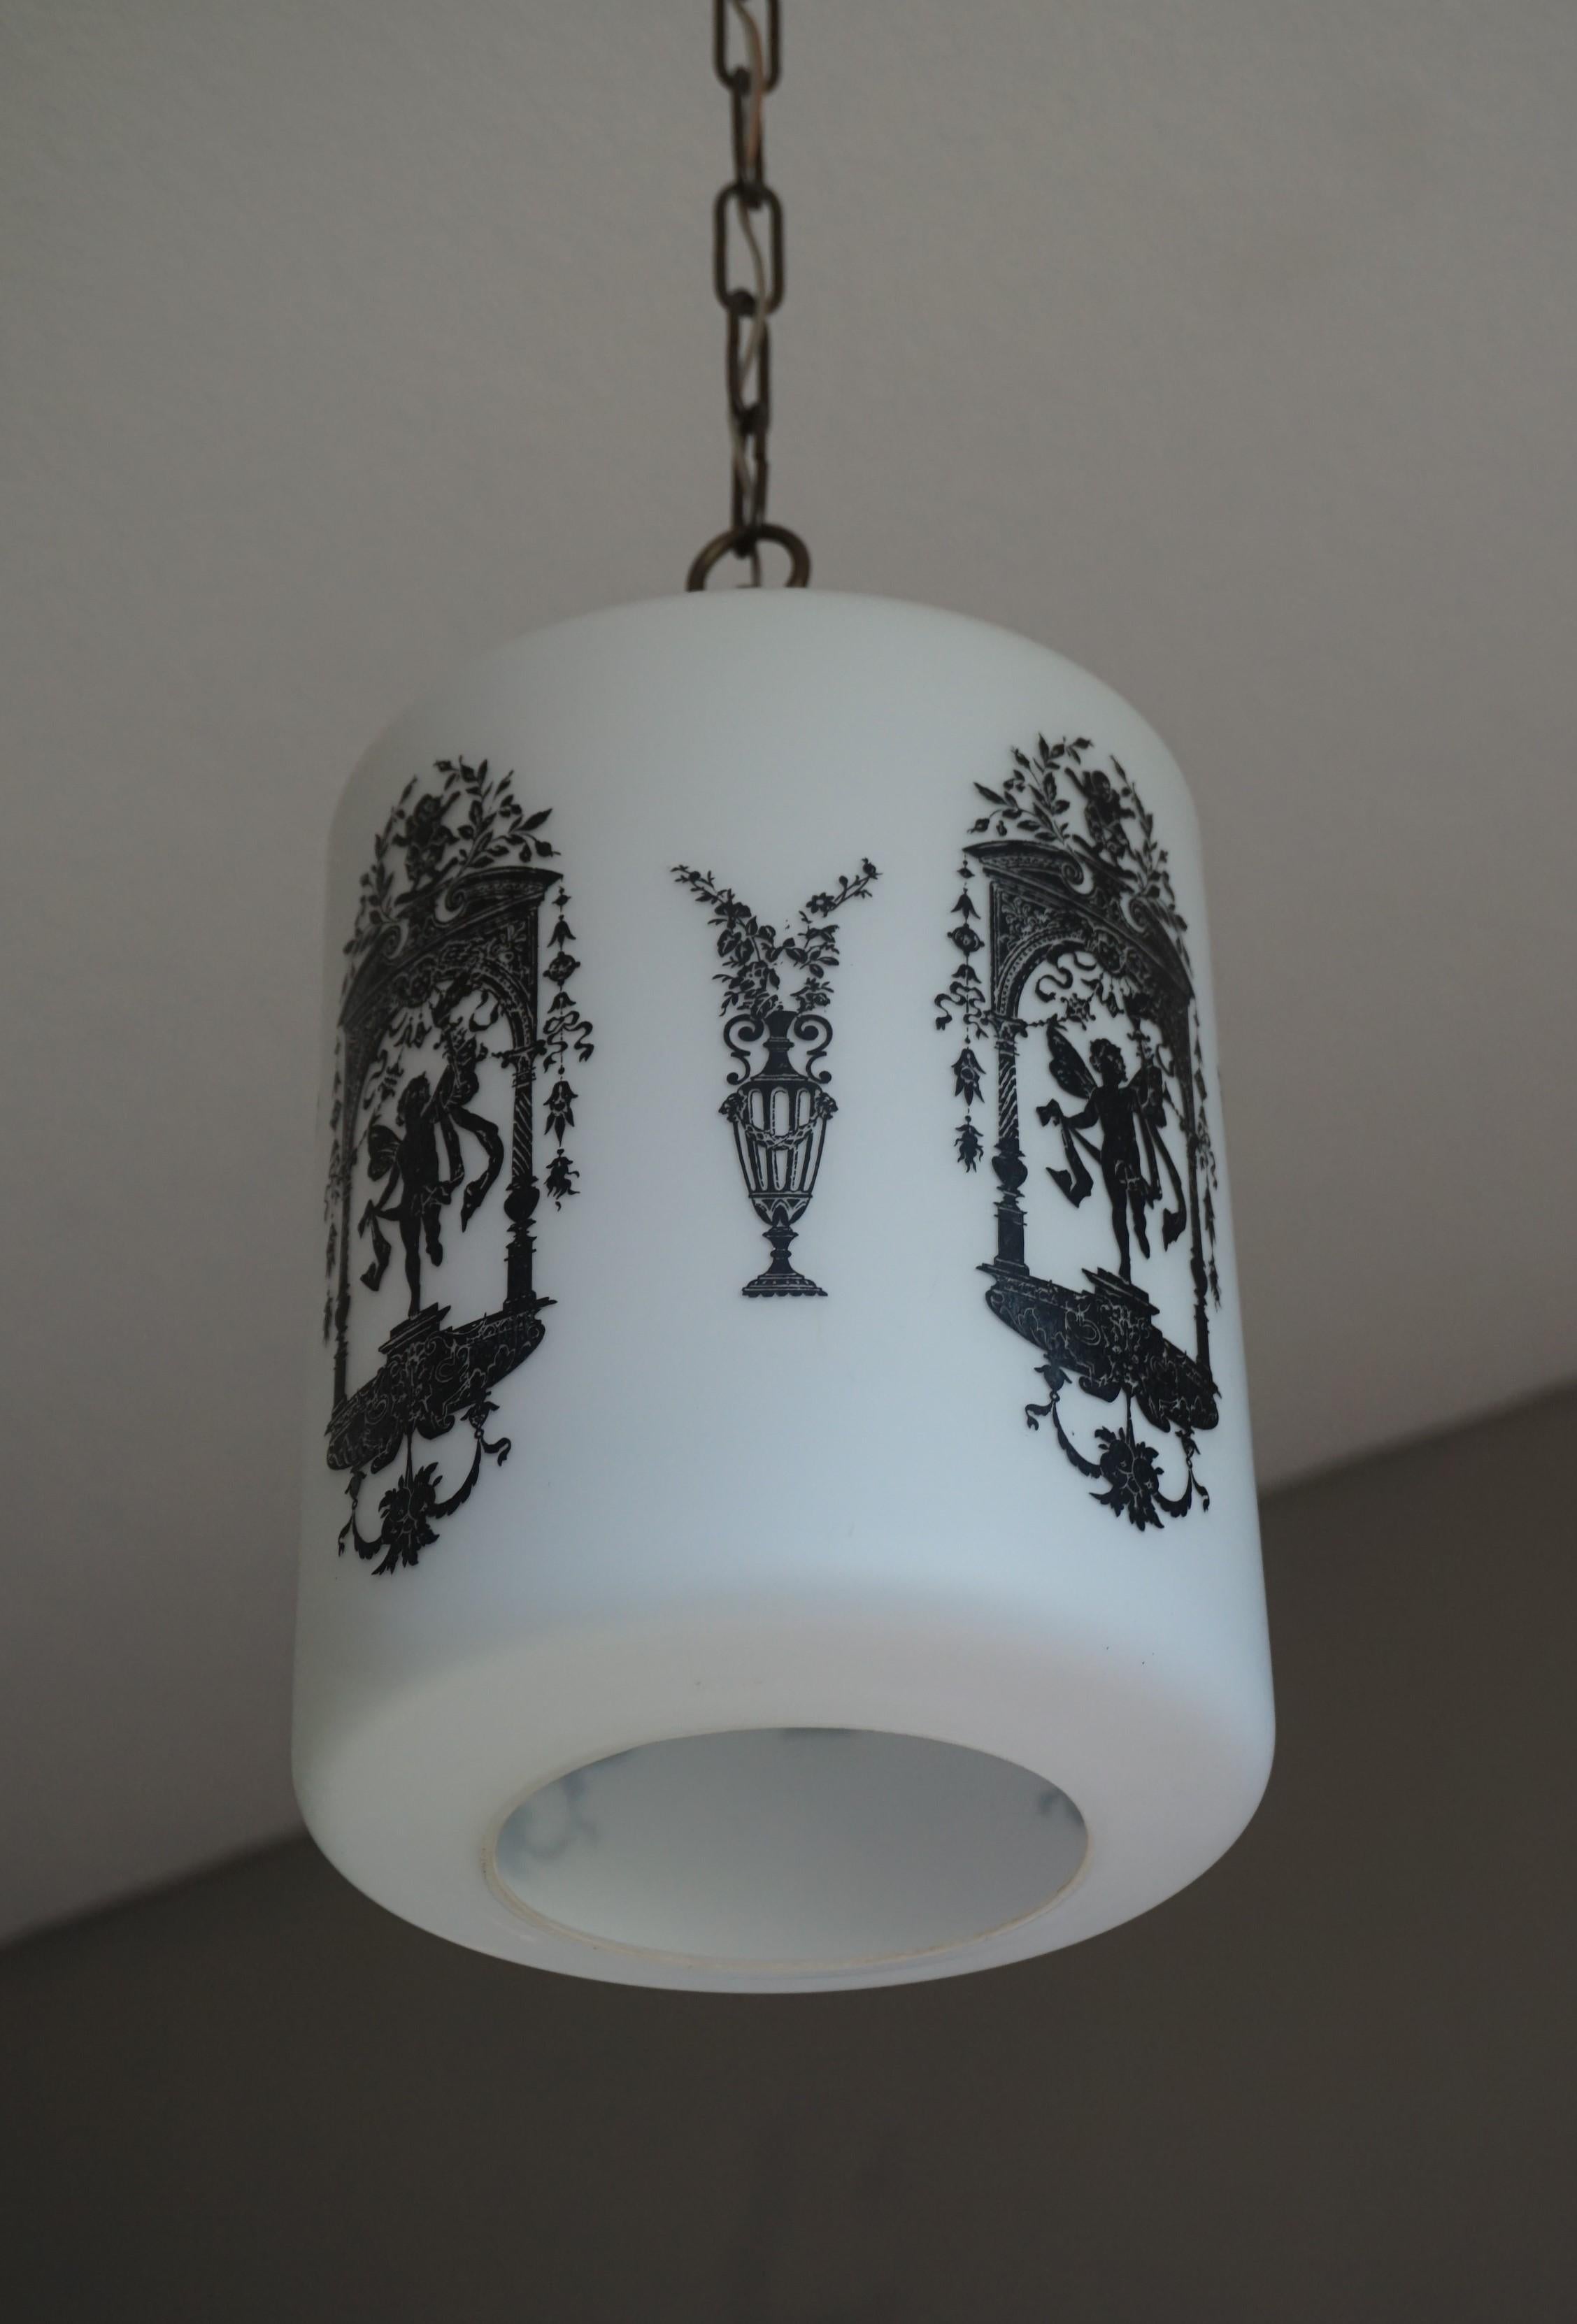 Hand-Crafted Early to Mid-20th Century Snowy White Glass Pendant with Black Renaissance Decor For Sale